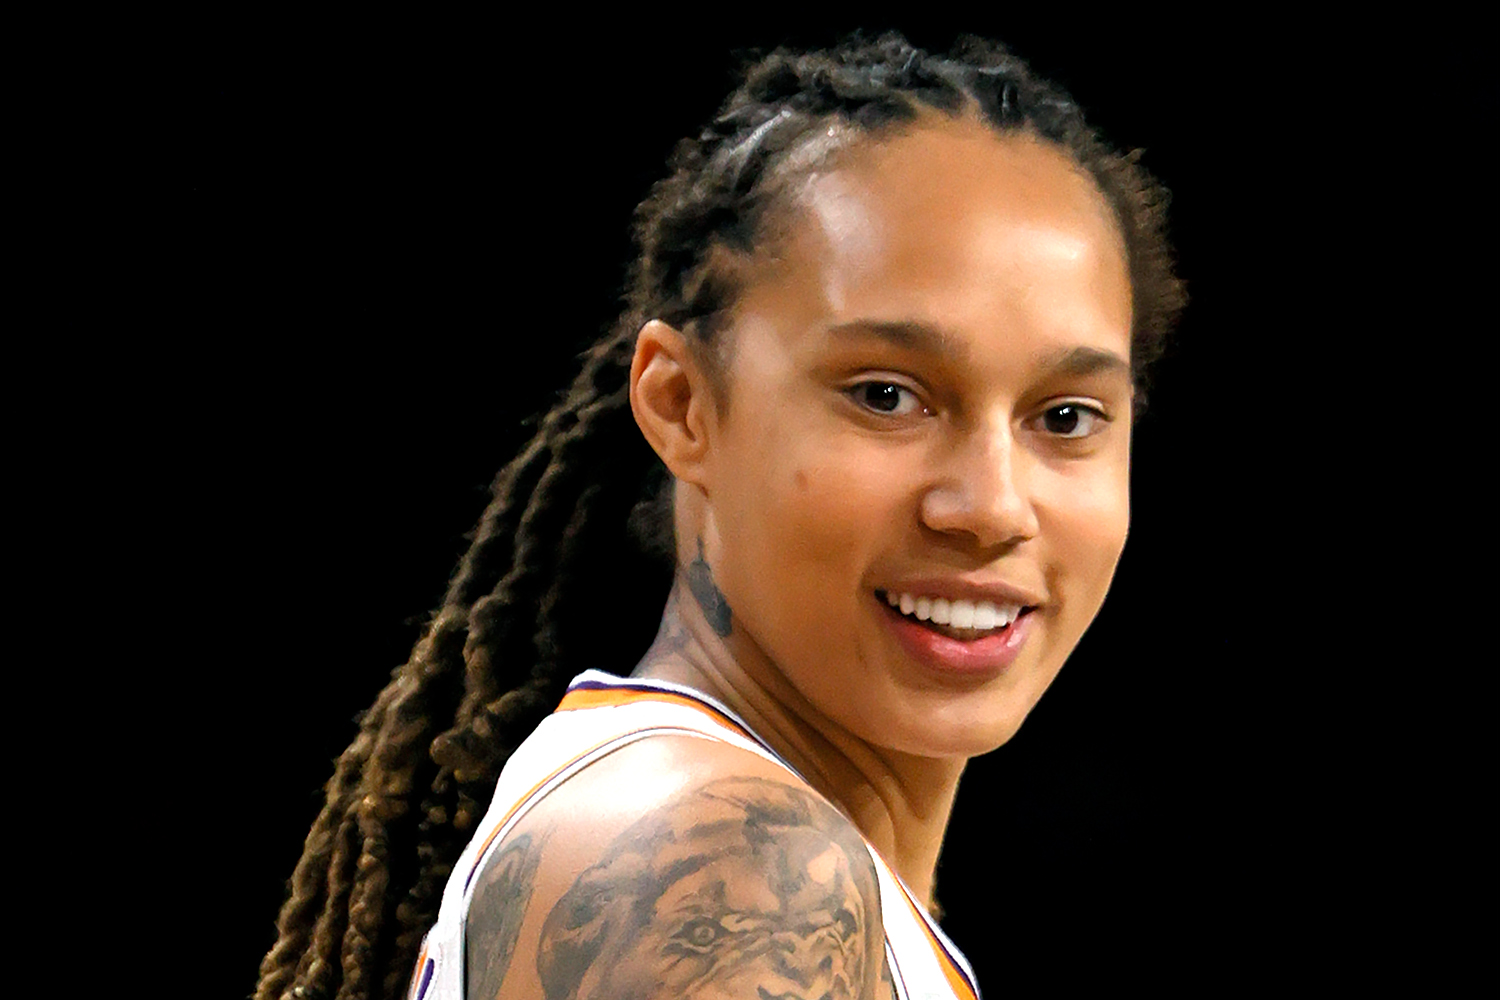 Brittney Griner detention in Russia: All you need to know.